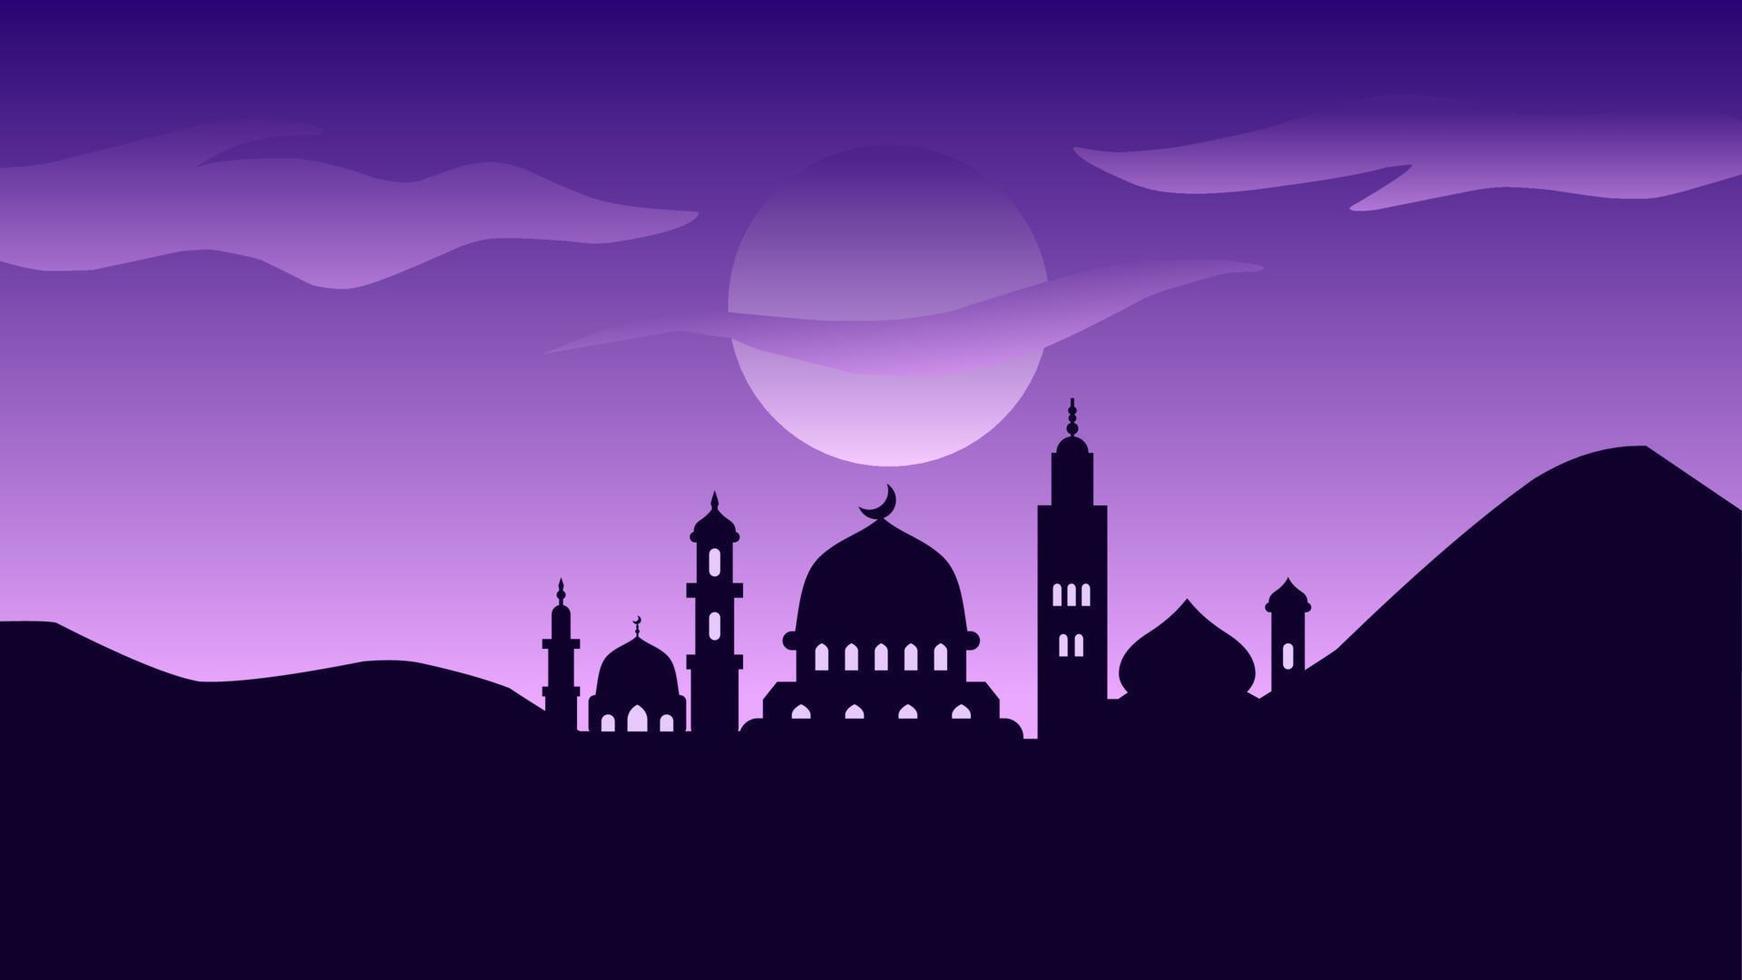 Background of silhouette mosque with purple night for islamic design. Landscape element for design graphic ramadan greeting in muslim culture and islam religion. Ramadan wallpaper of mosque and hill vector